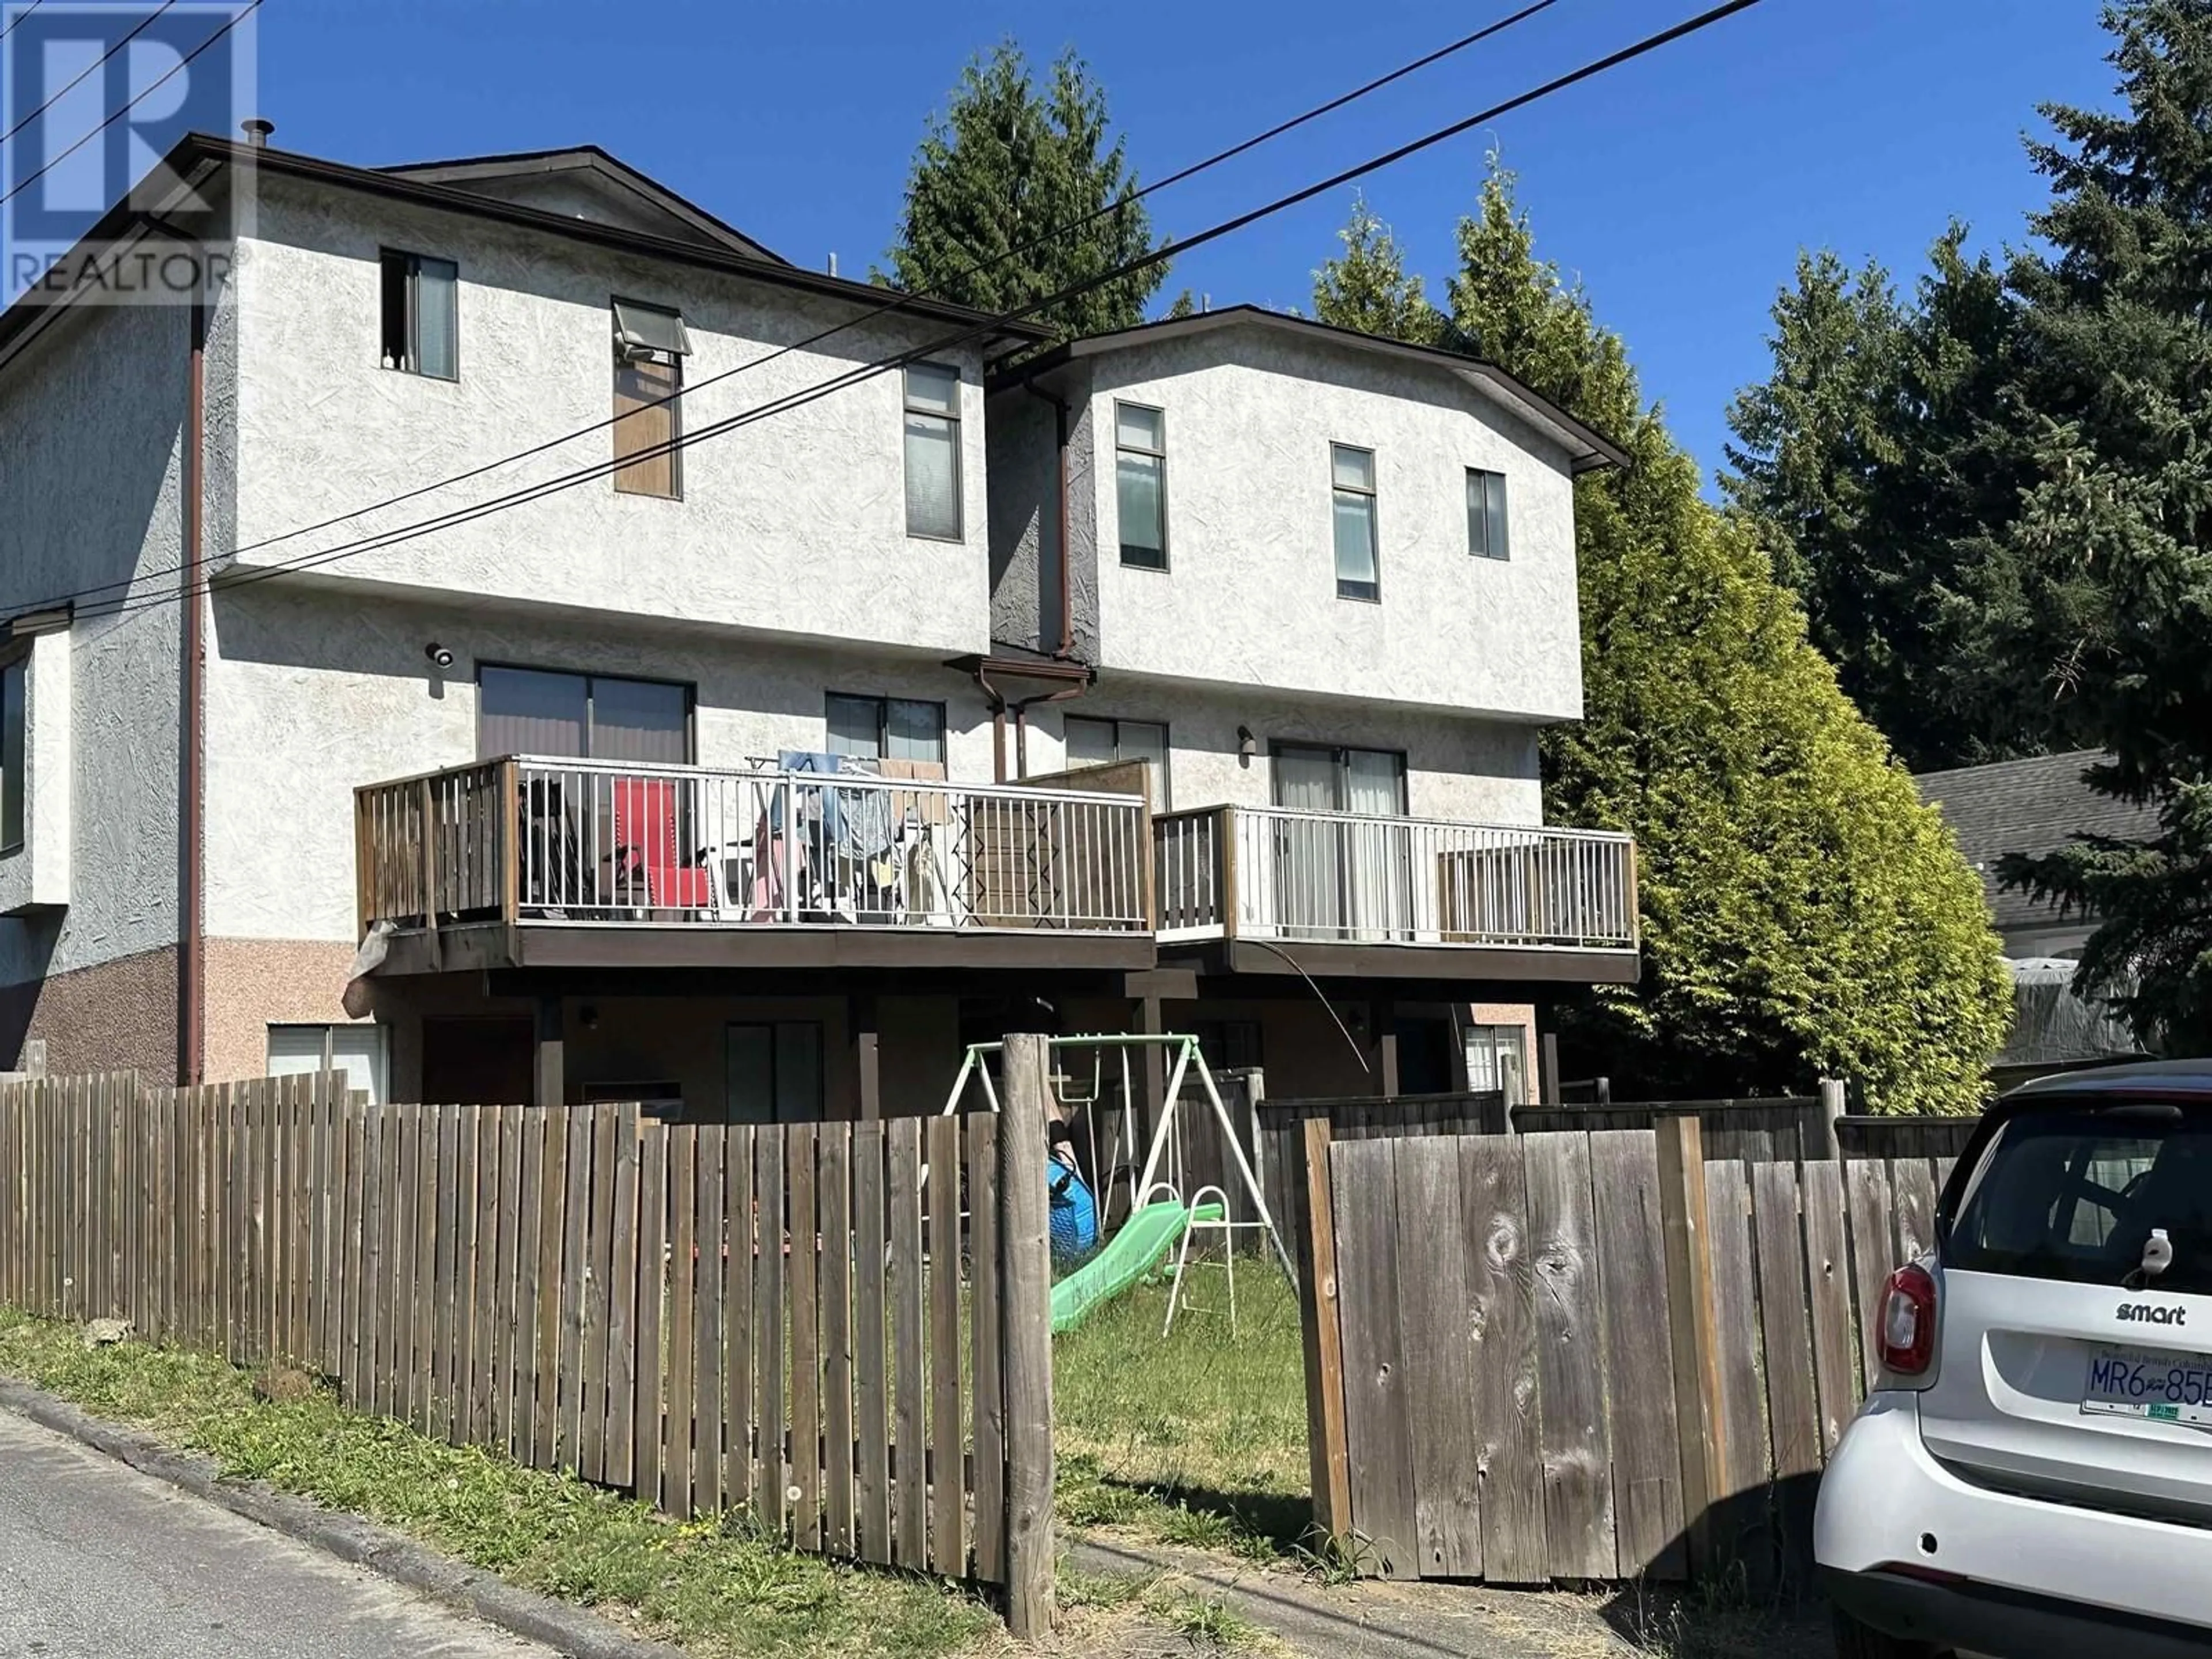 Frontside or backside of a home for 234A HART STREET, Coquitlam British Columbia V3K4A4